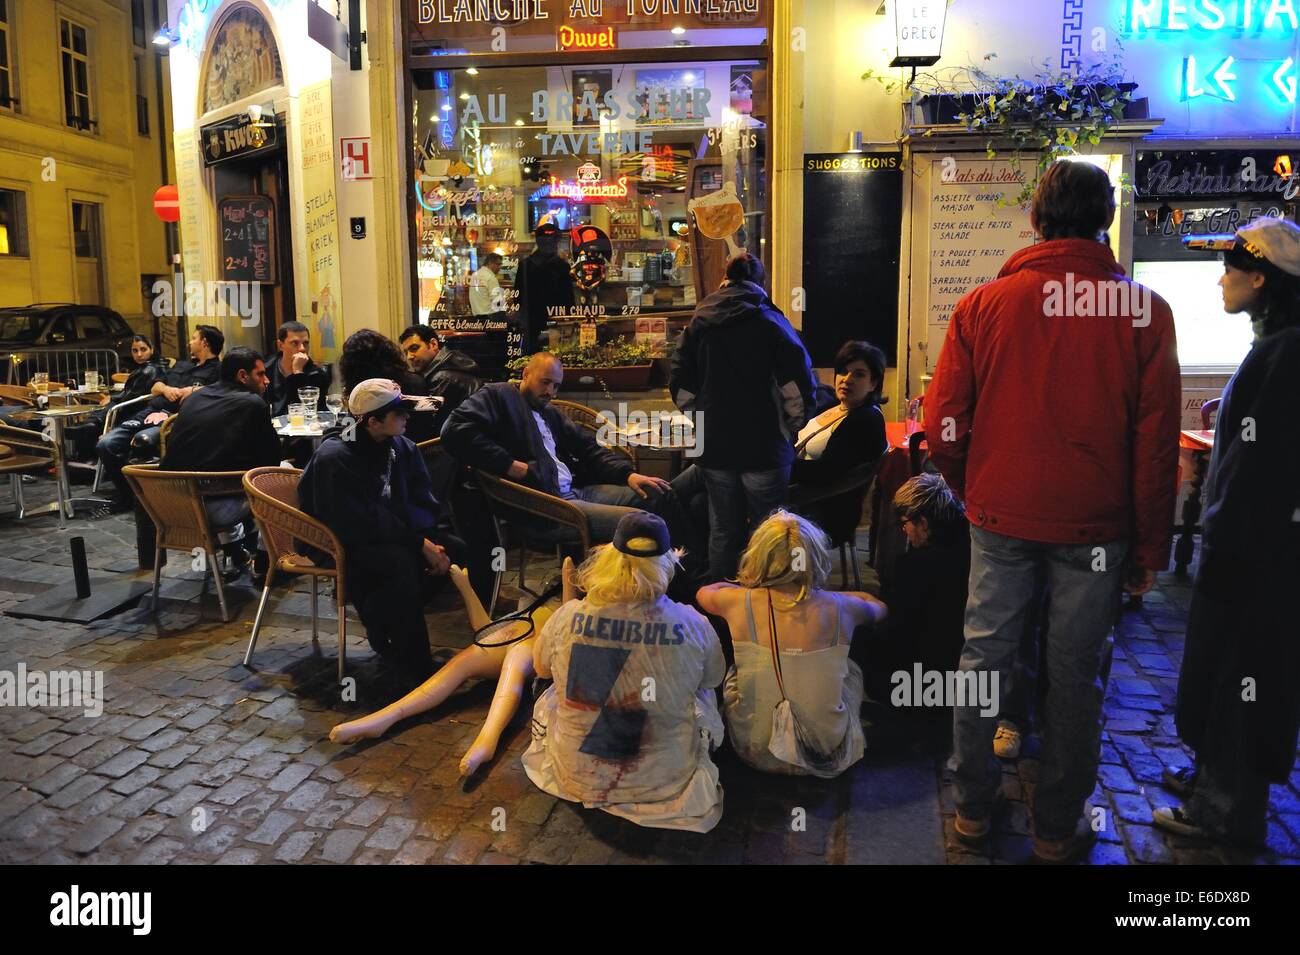 Drinkers sit an an outdoor cafe in Brussels, Belgium. Stock Photo